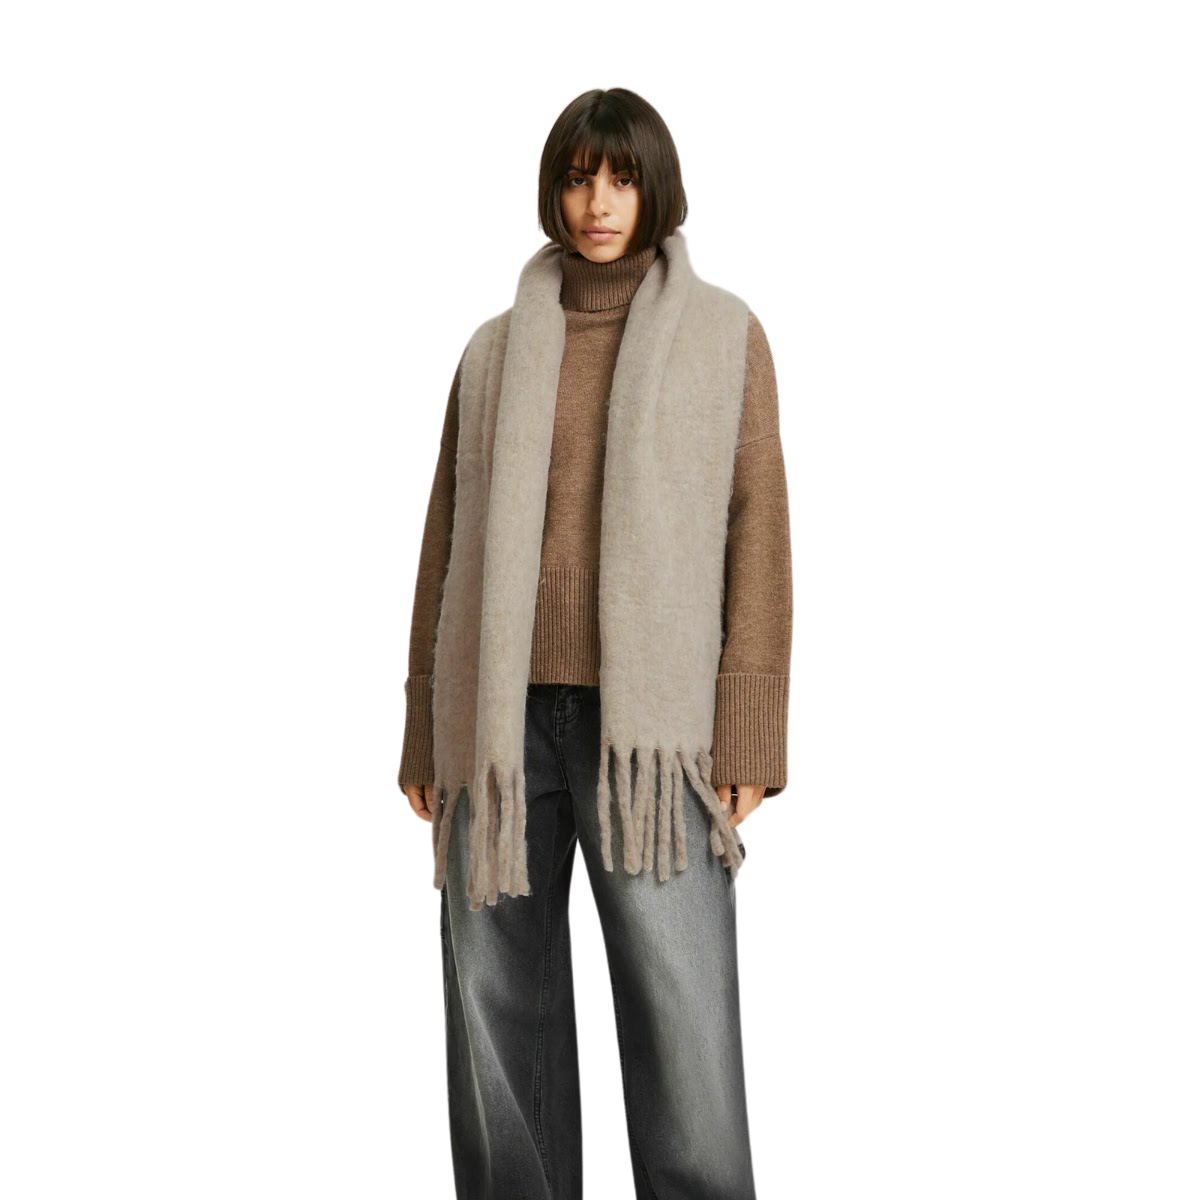 Plain Scarf in Sand, €15.99